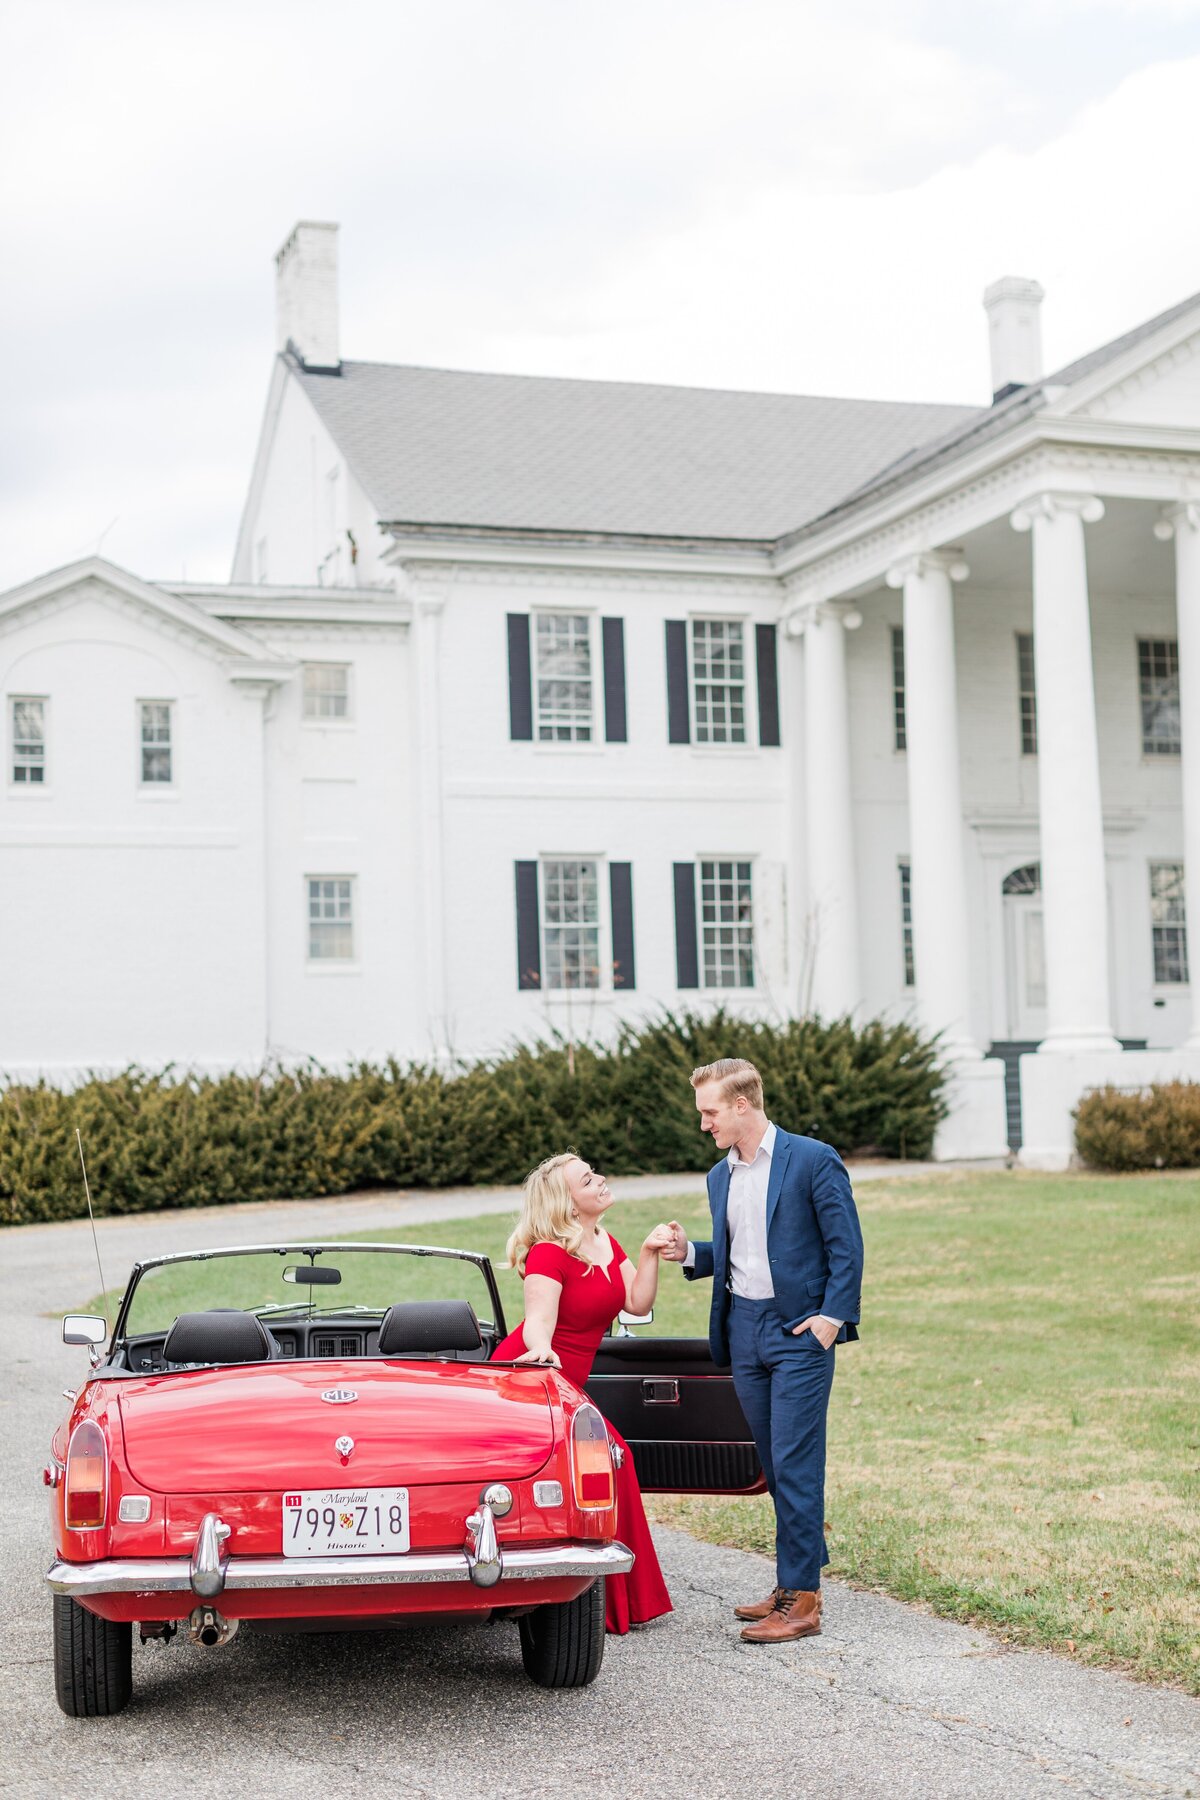 Vintage-Car-Engagement-Photos-DC-Maryland-Silver-Orchard-Creative_0031